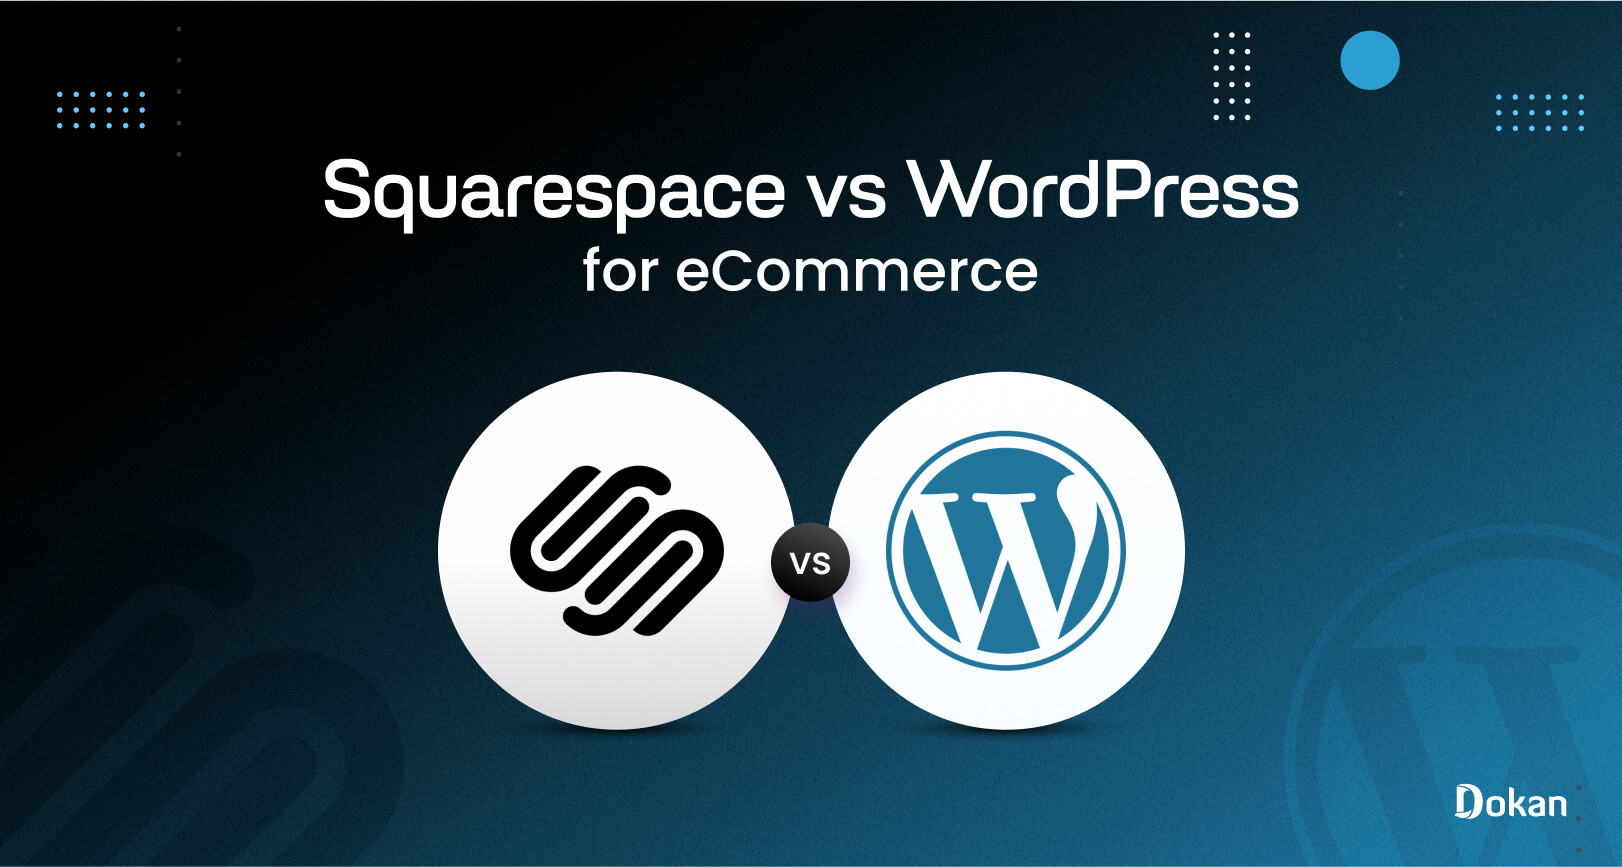 Feature image of squarespace vs WordPress for eCommerce